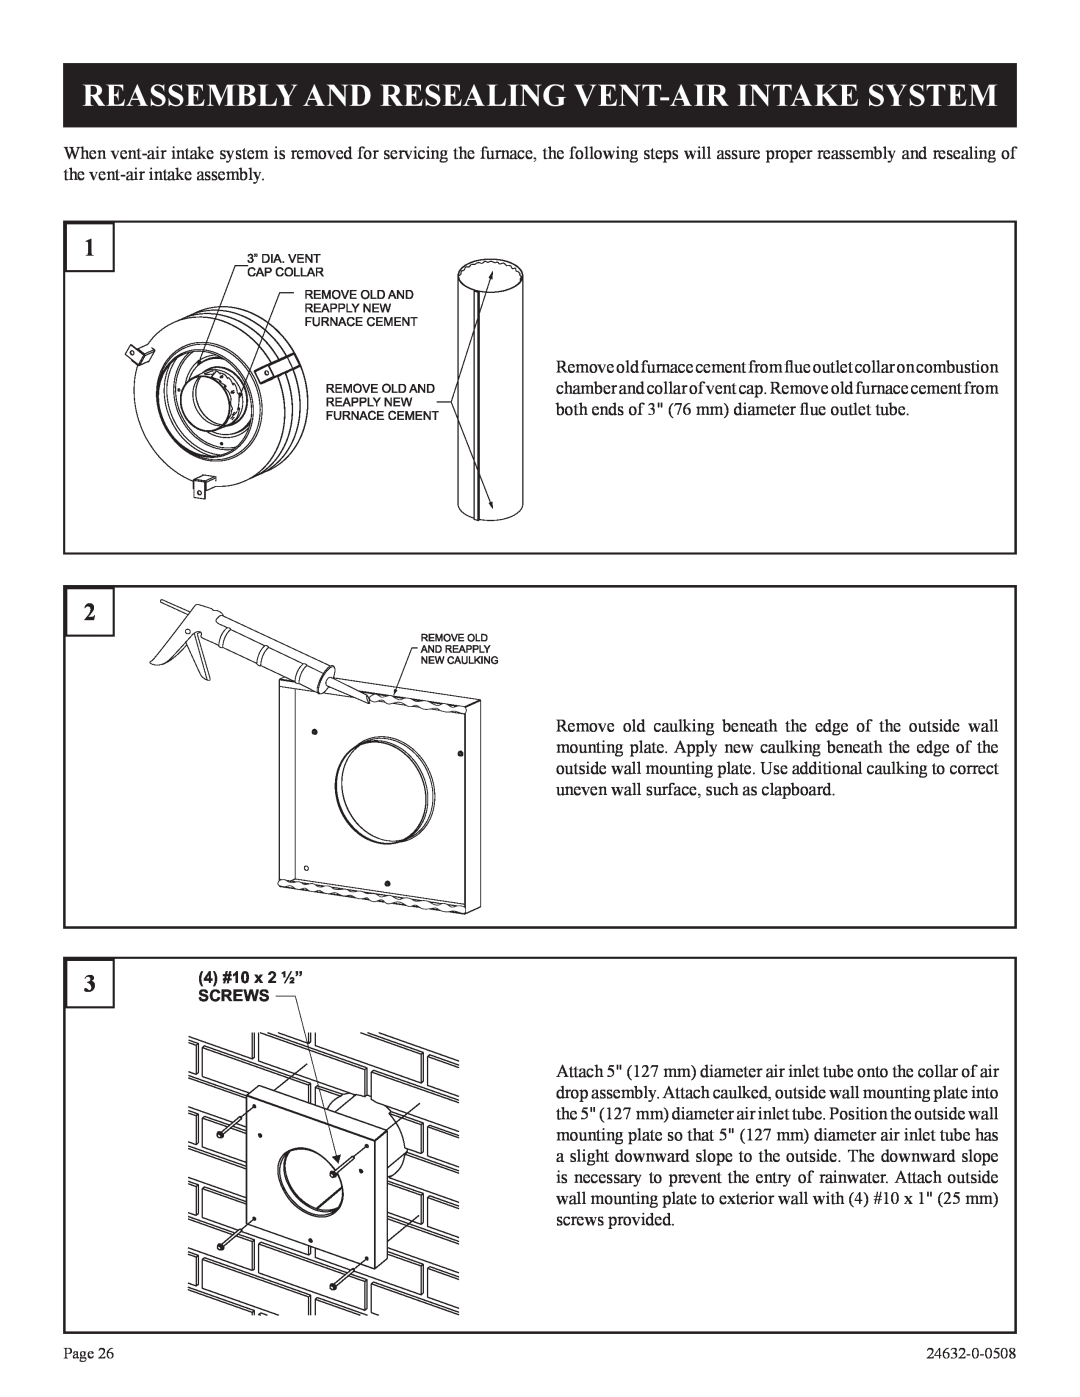 Epson HWDV080DV(N, P)-1 installation instructions Reassembly And Resealing Vent-Airintake System, 4#10 x 2 ½” SCREWS 